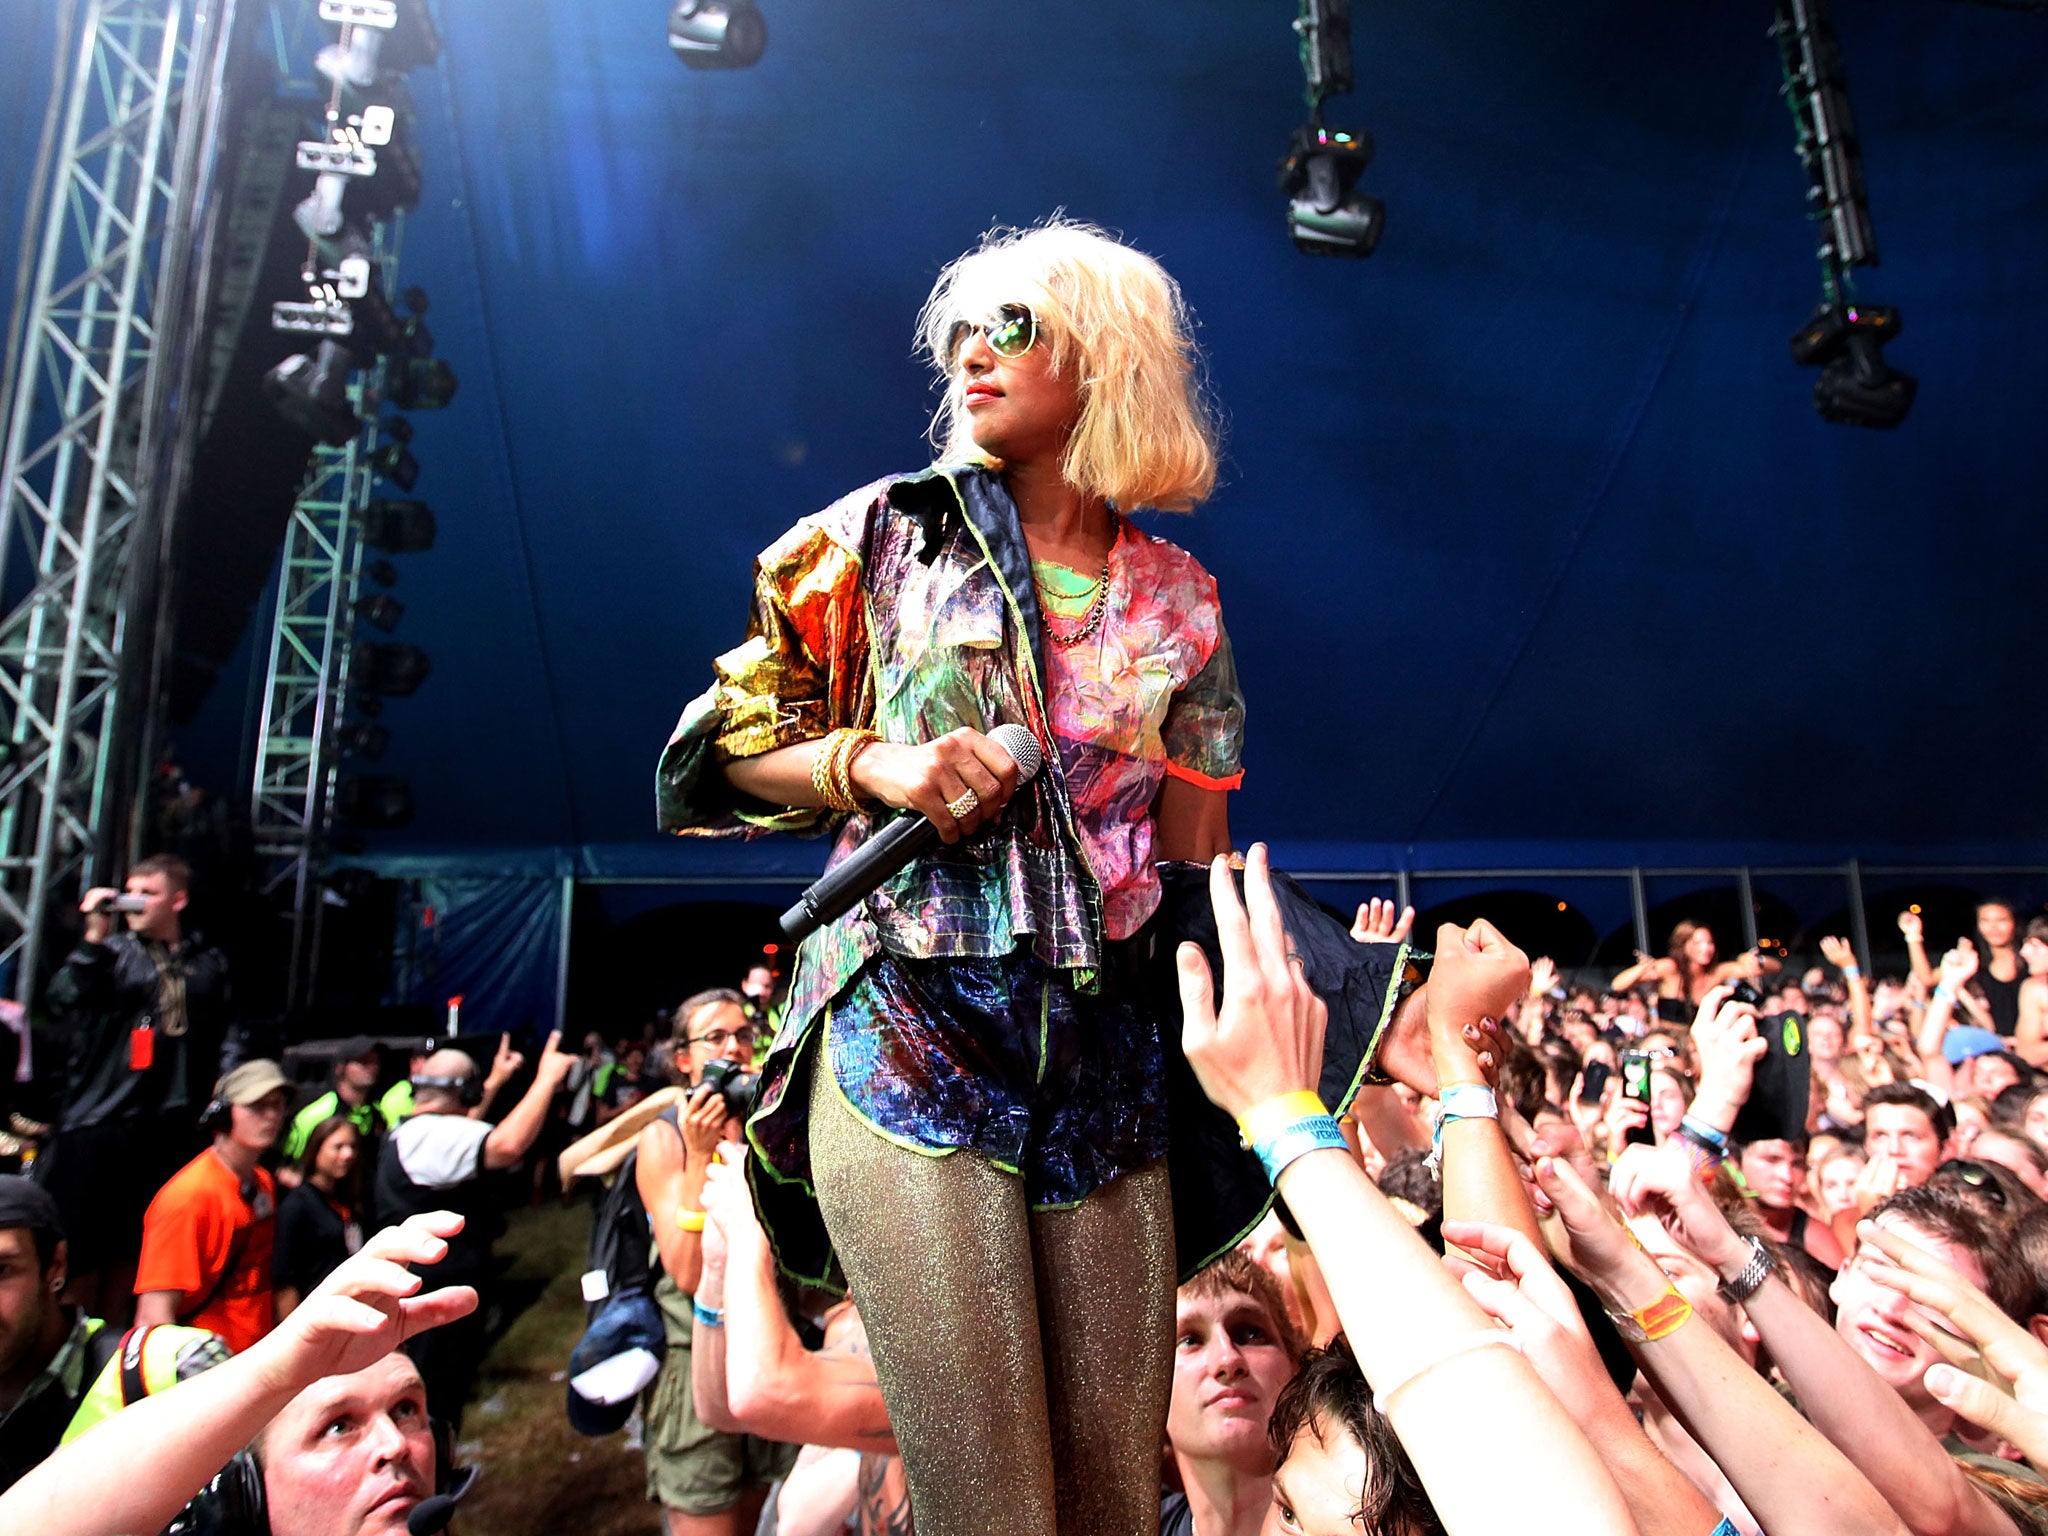 British rapper M.I.A will headline Lovebox 2014 with Chase and Status, Katy B, Bonobo and more